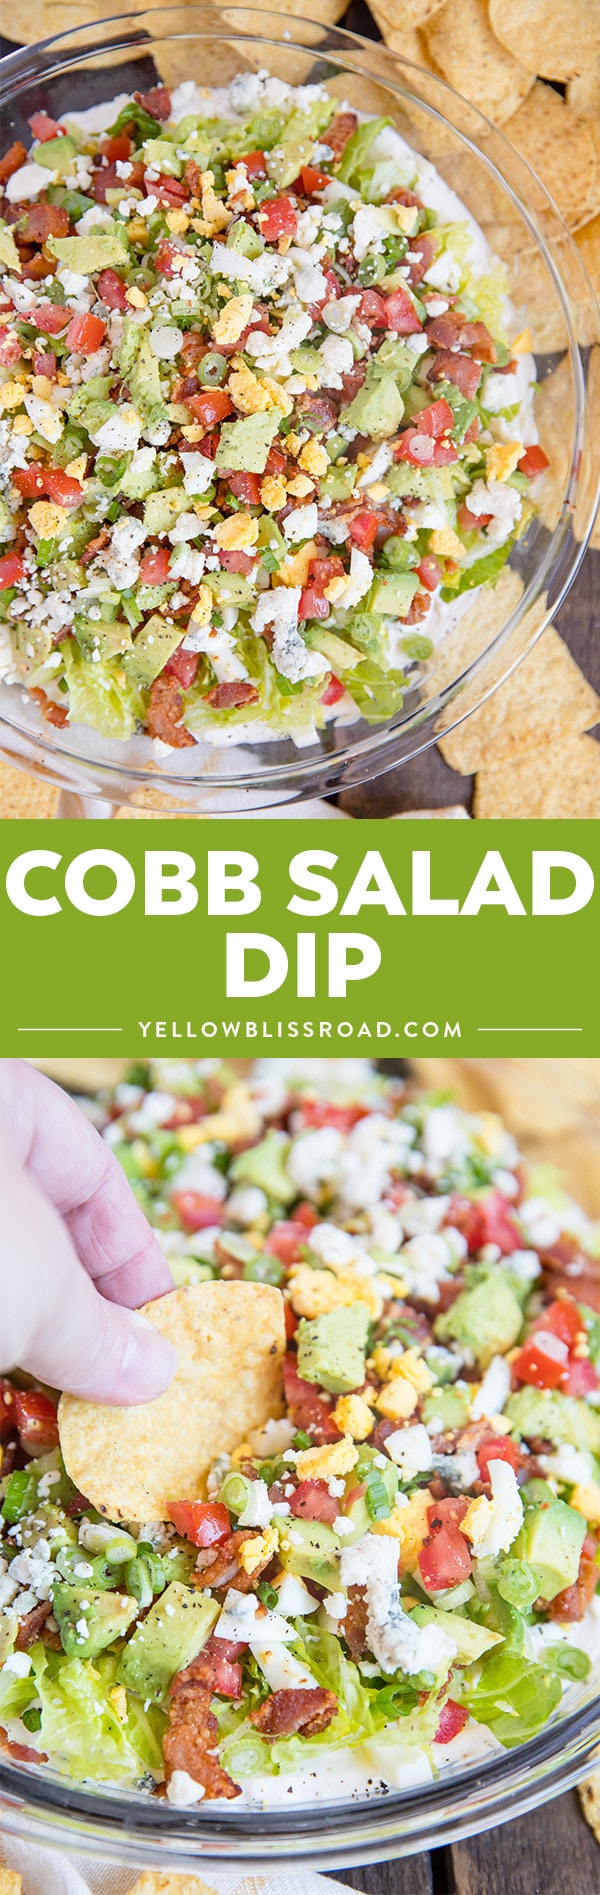 cobb salad dip collage with two images and text